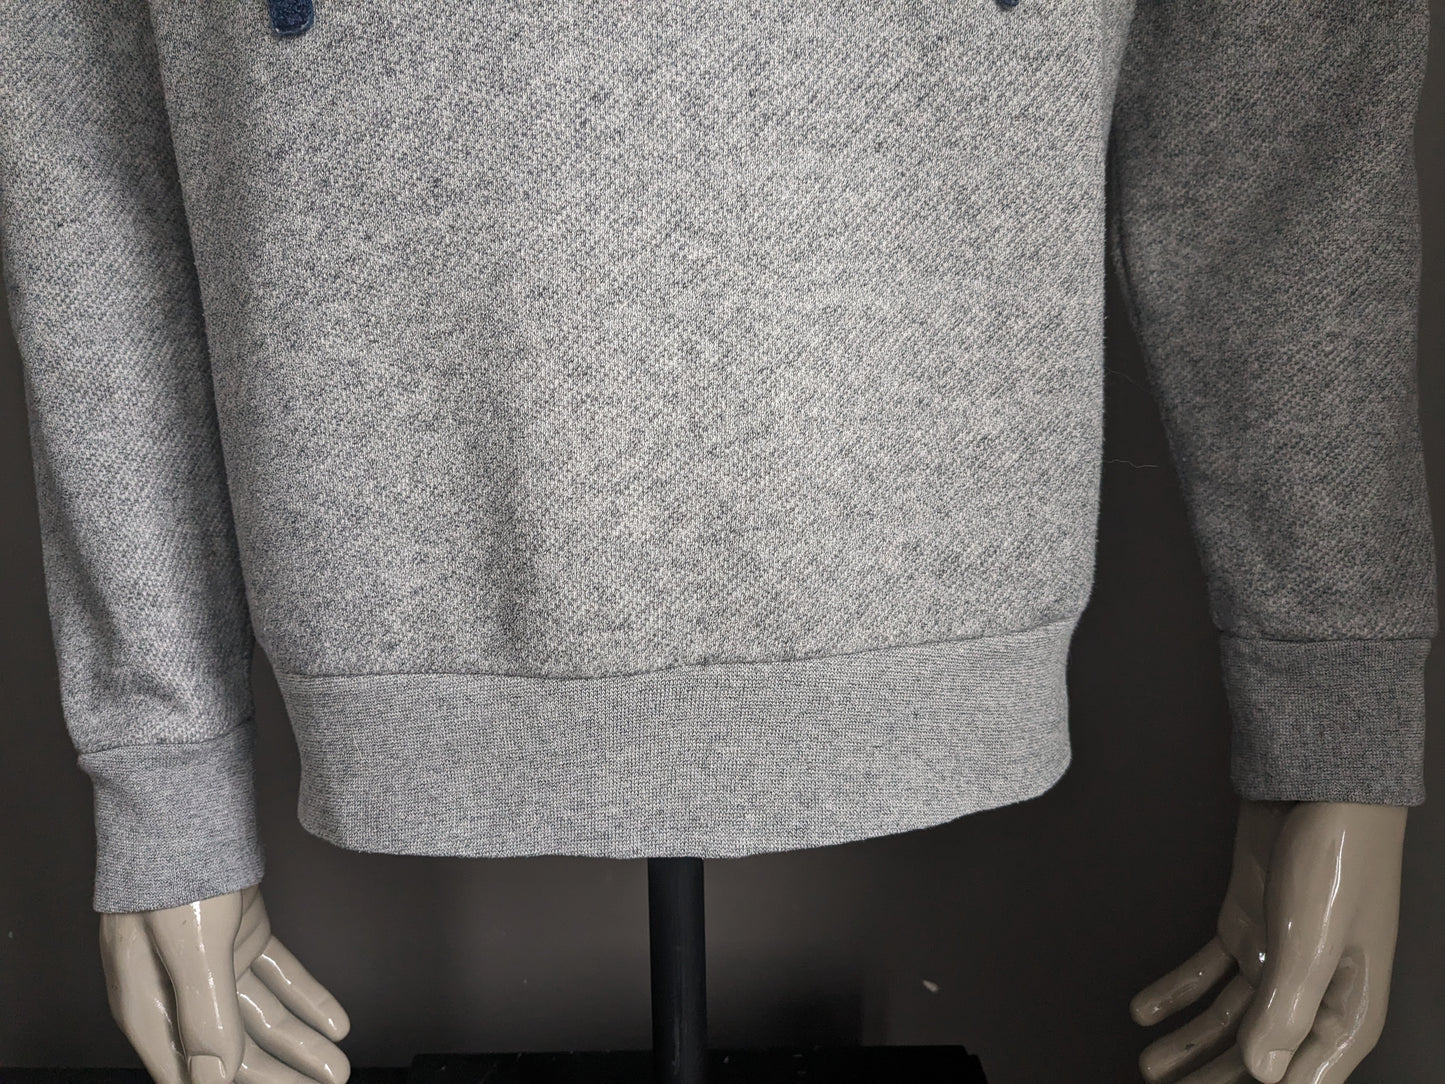 Pull H&M. Taille gris mixte L.